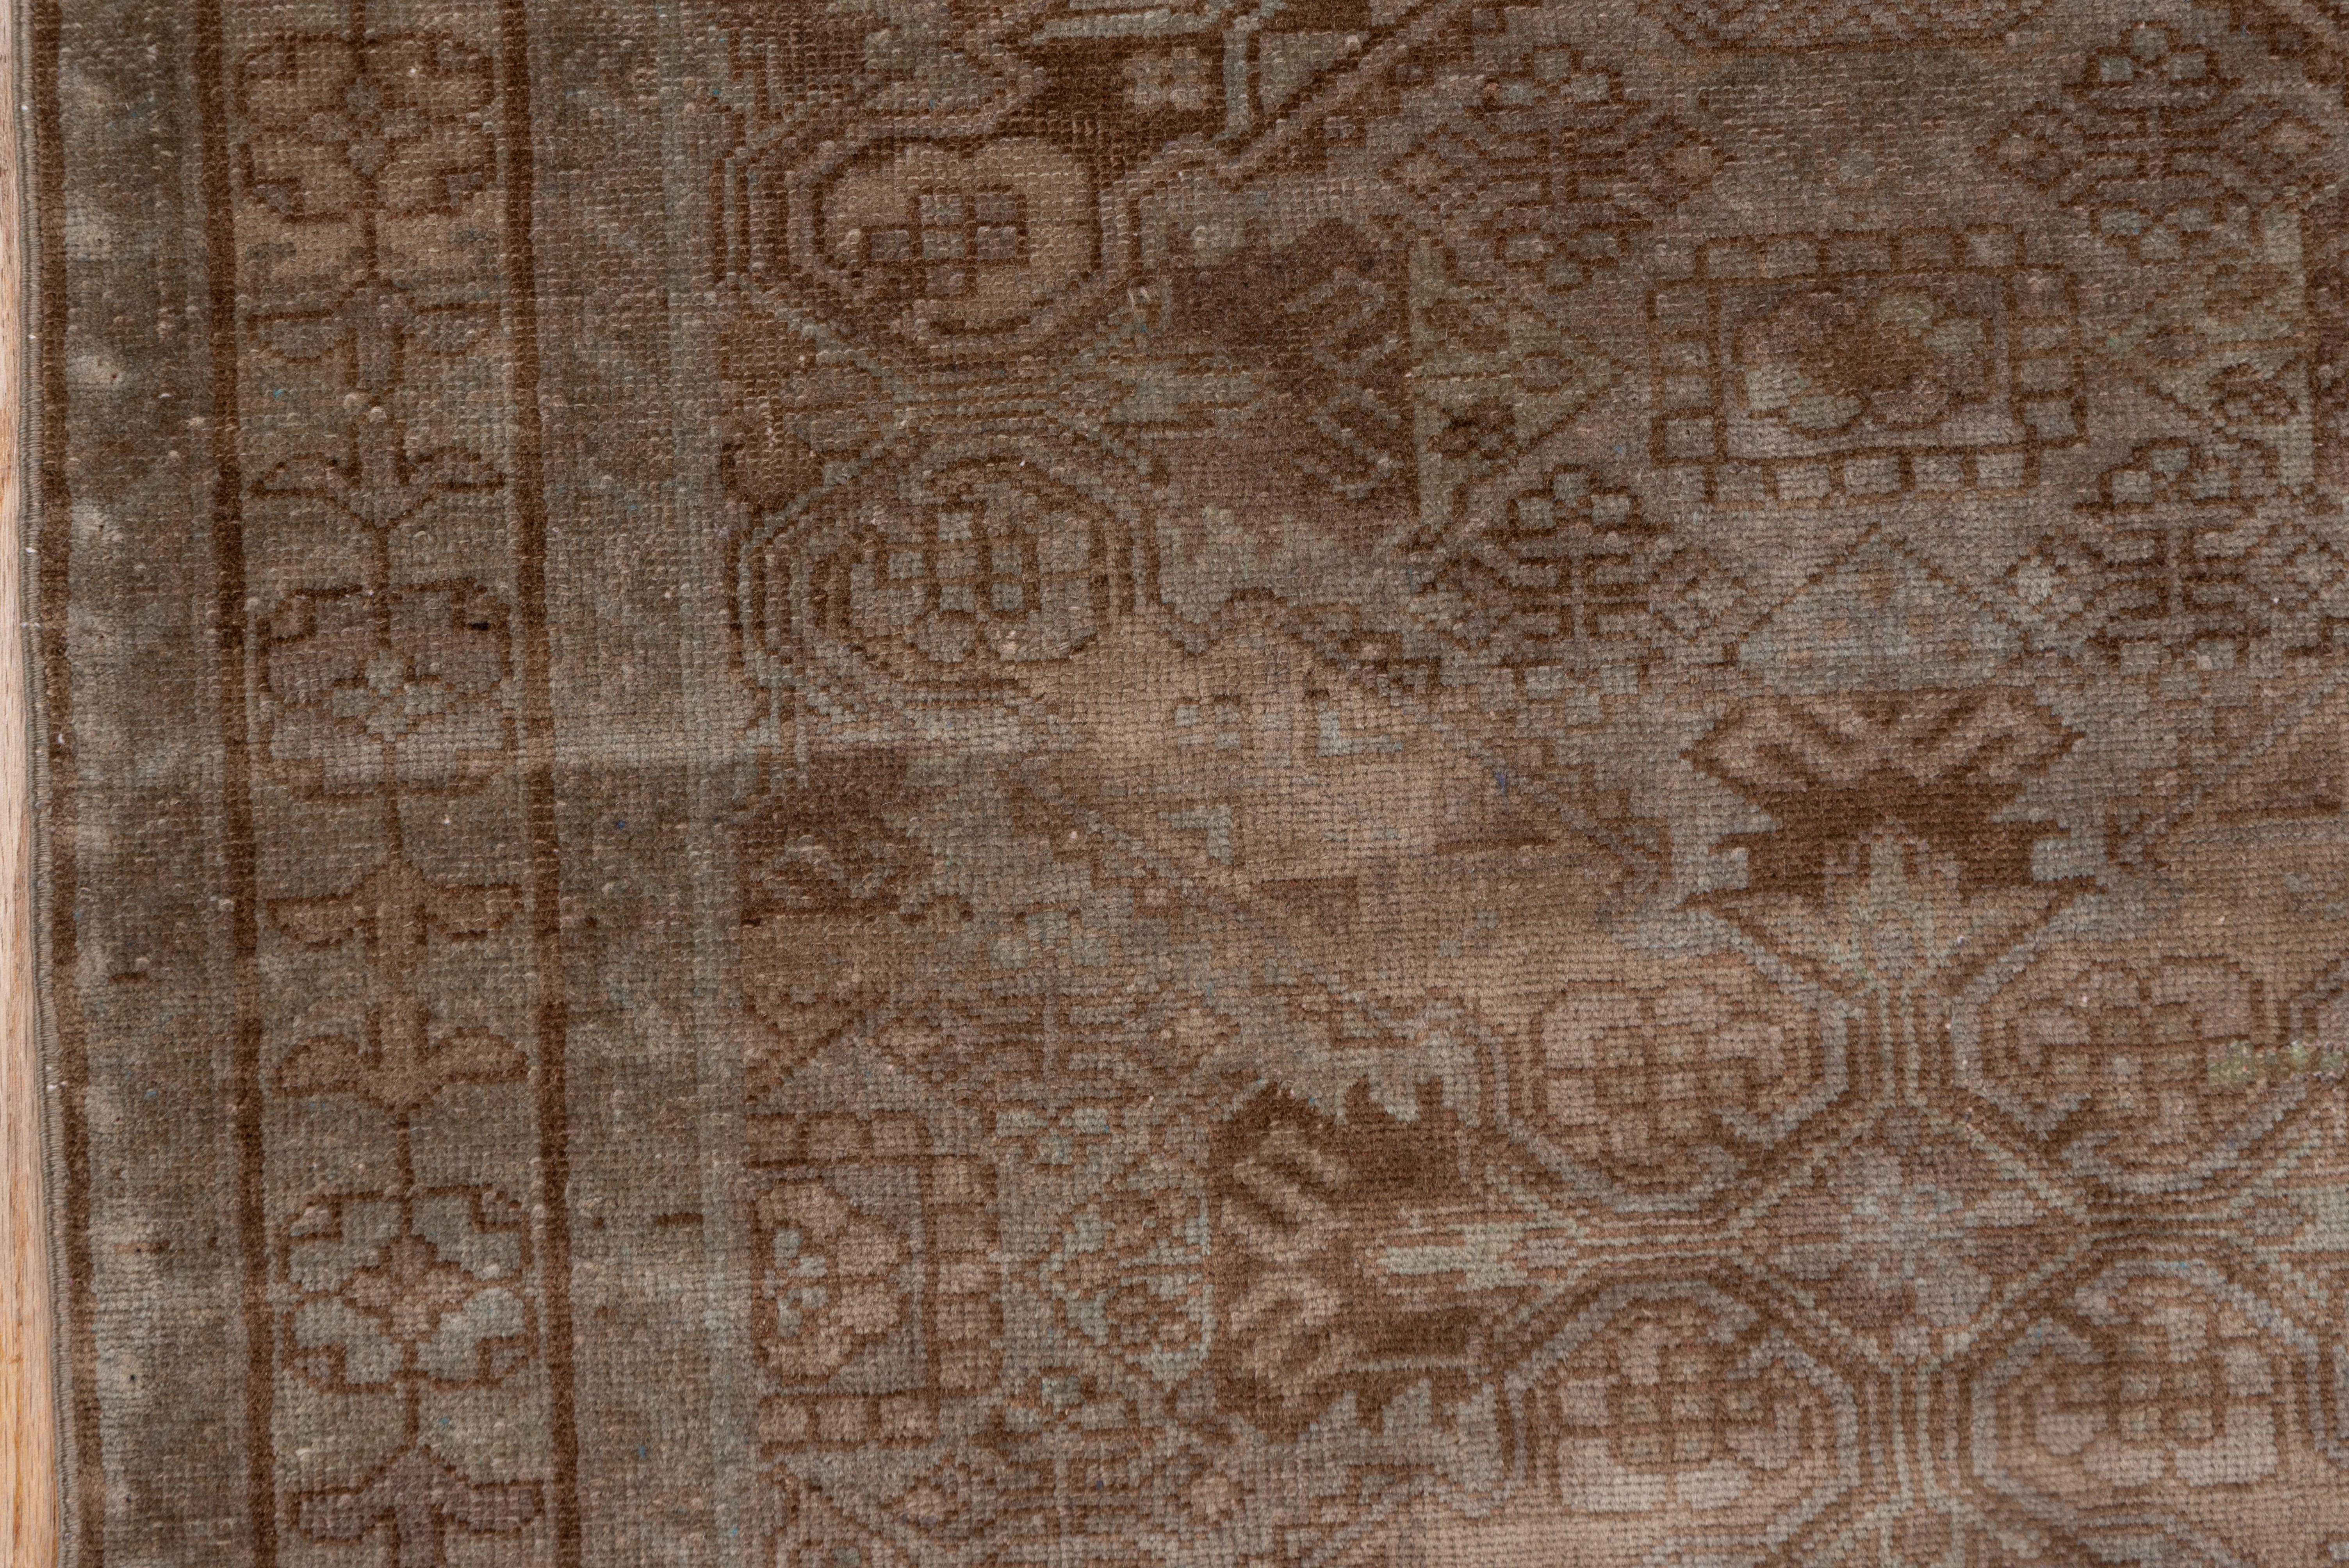 This rusitc lookingwest Persian small Malayer runner shows a Caucasian Zeychur Kurba pattern of St. Andrew's crosses on a tan ground. Reversing flower module border. General earth tone palette. Moderate weave on cotton. Brown tones.
 